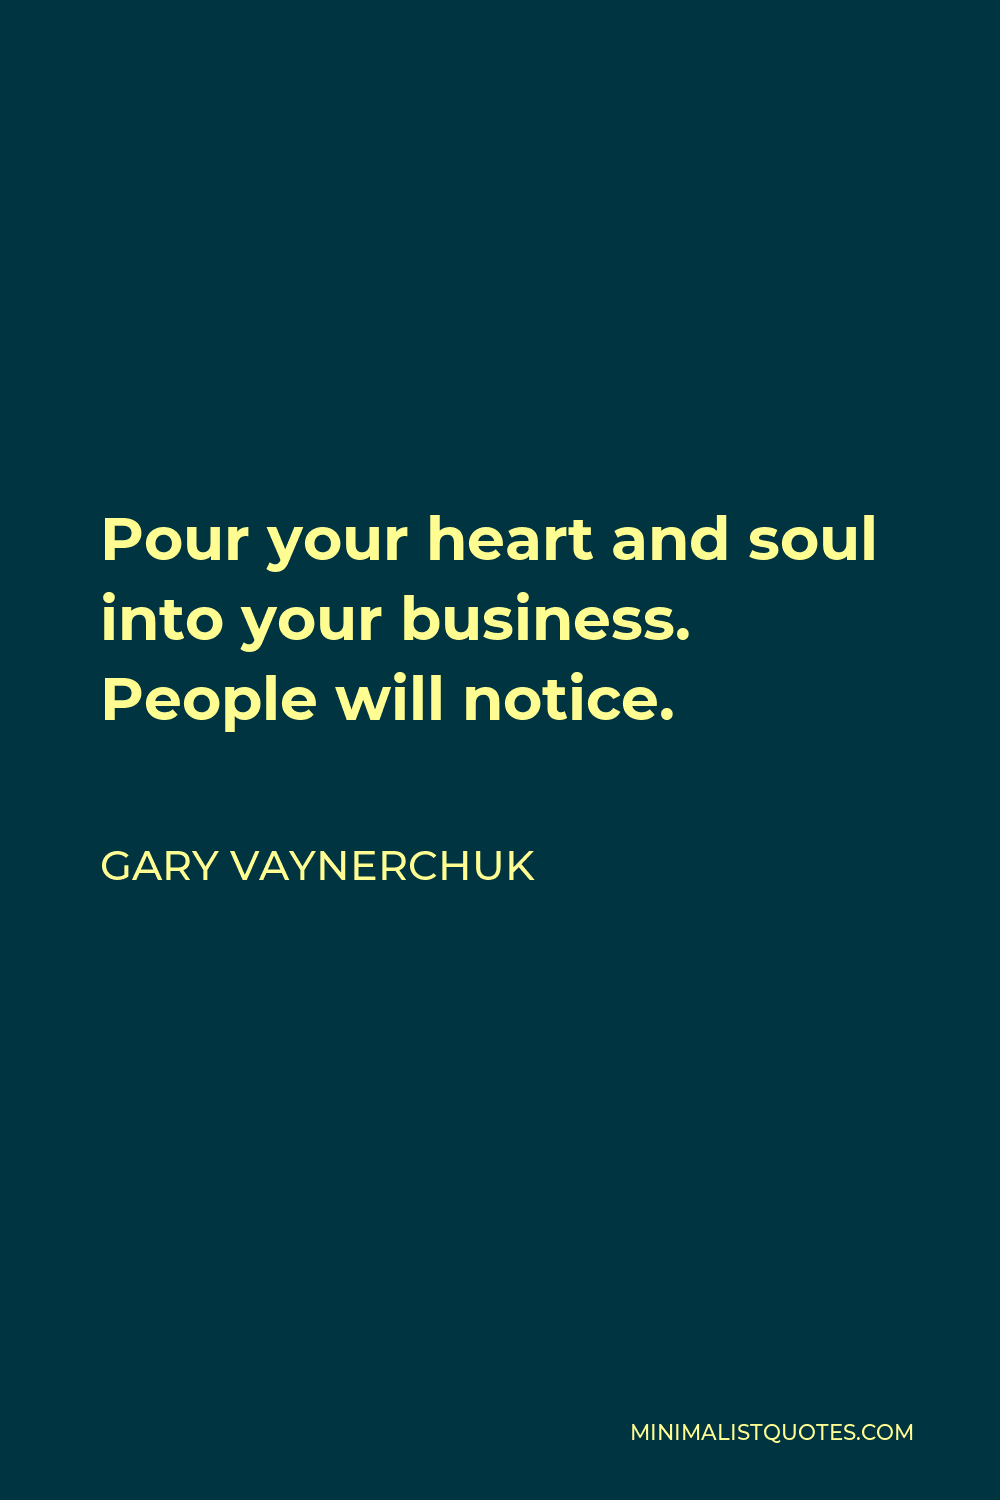 Gary Vaynerchuk Quote - Pour your heart and soul into your business. People will notice.